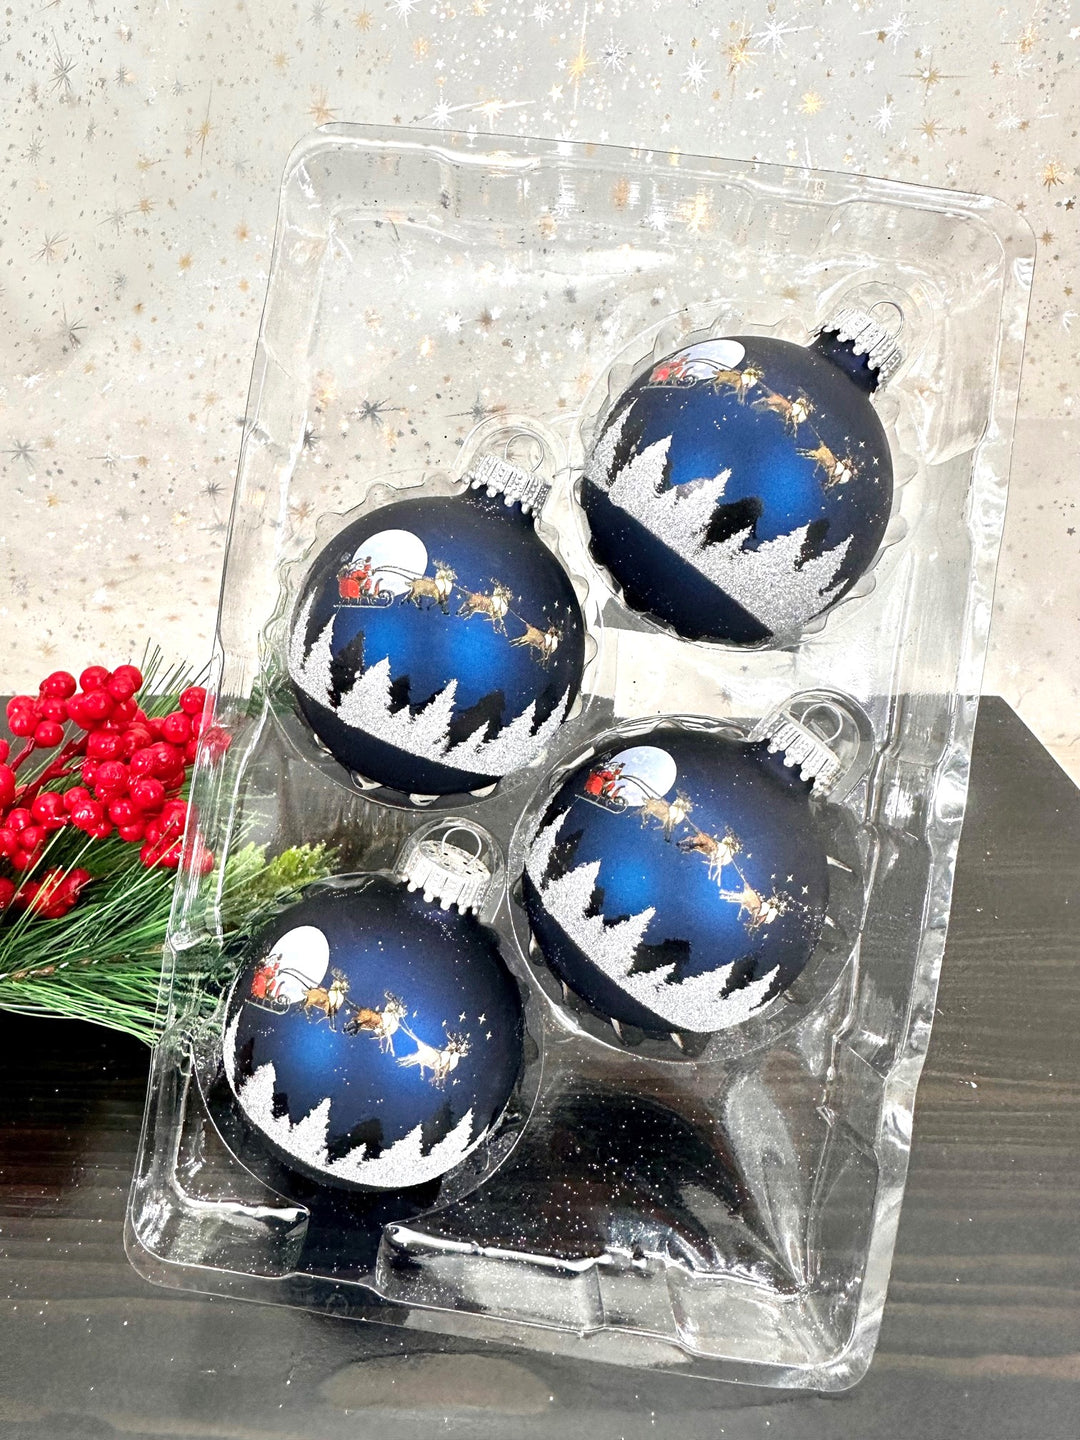 Glass Christmas Tree Ornaments - 67mm/2.63" [4 Pieces] Decorated Balls from Christmas by Krebs Seamless Hanging Holiday Decor (Midnight Haze Blue with Spirit of Christmas)